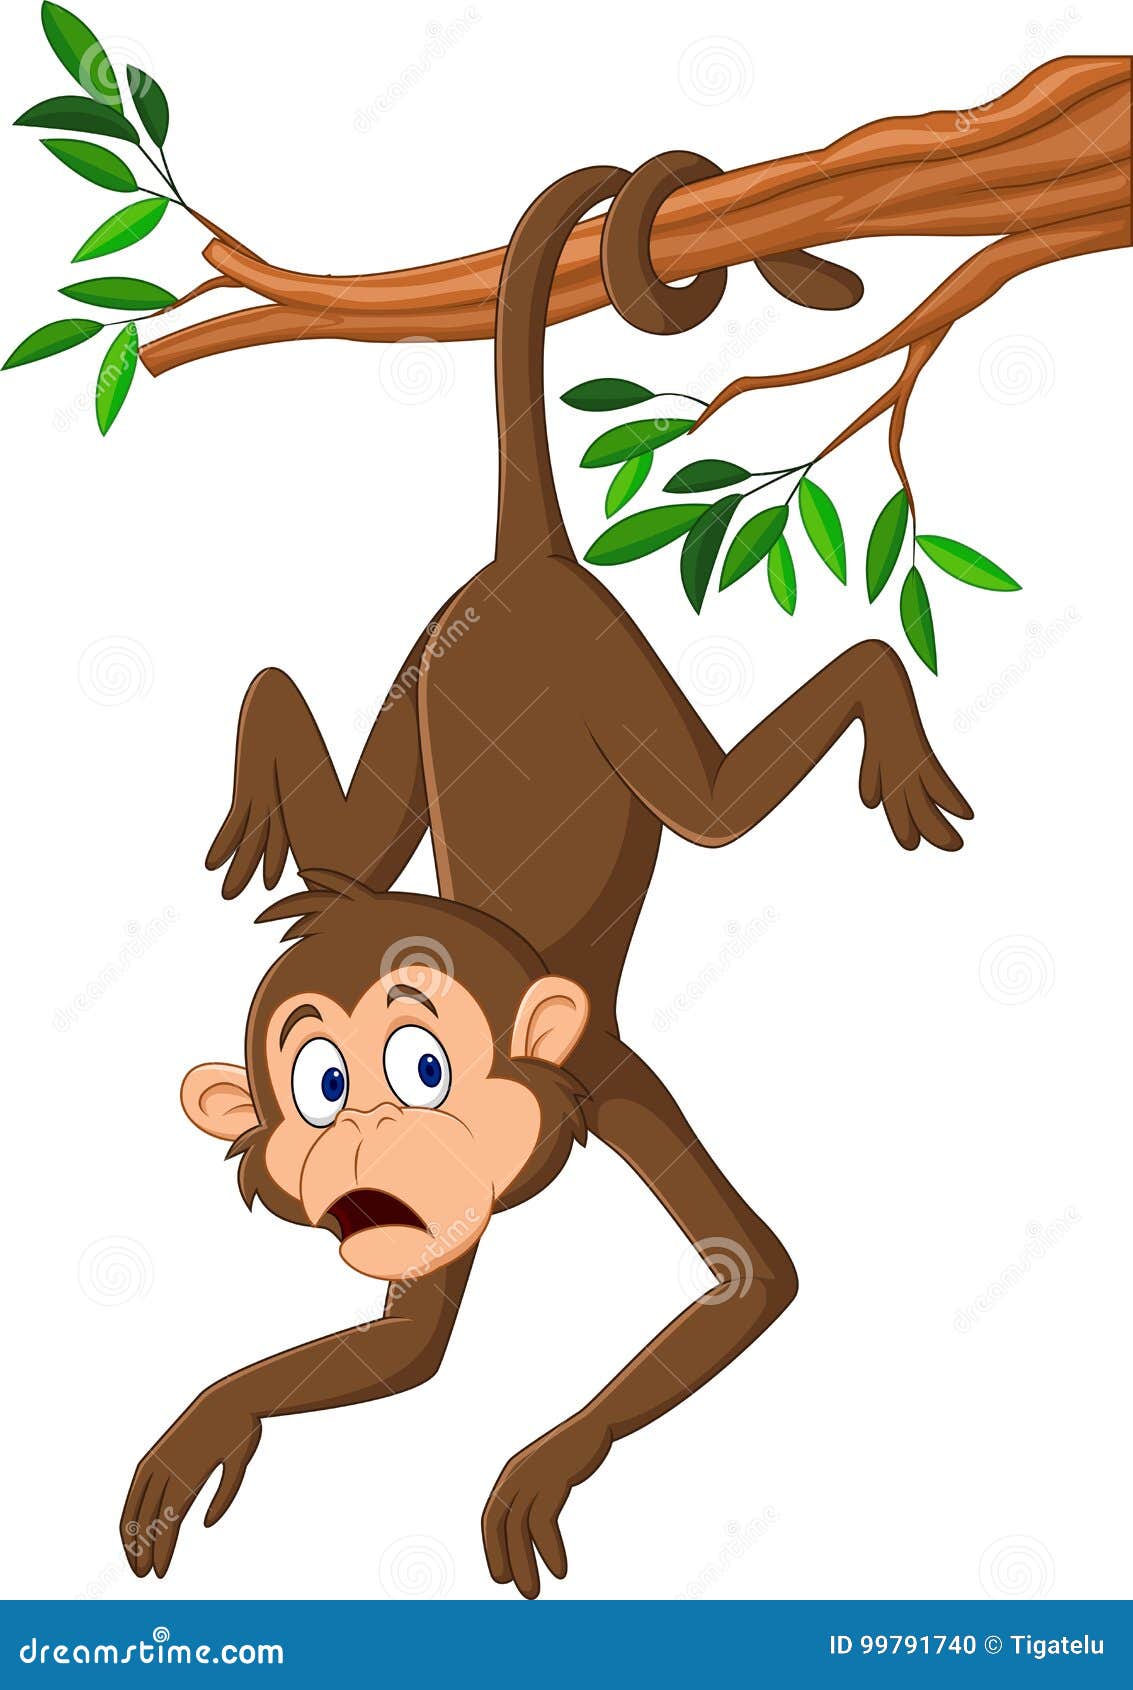 cartoon monkey hanging on the tree branch with his tail